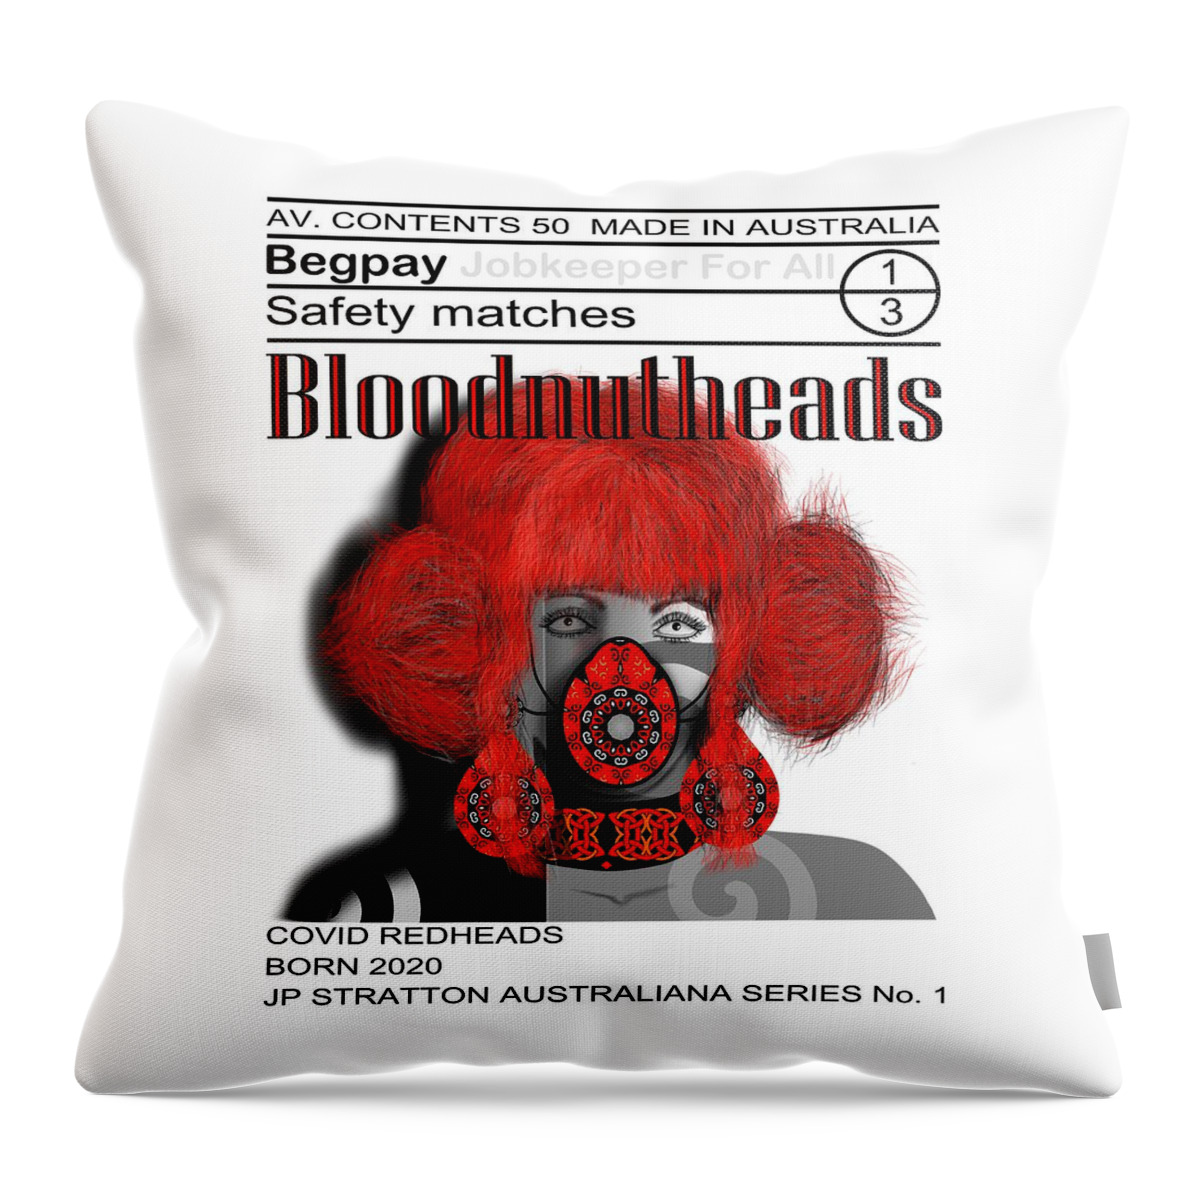 Australiana Throw Pillow featuring the drawing Australiana Iconic Matches Bloodnut Female I by Joan Stratton